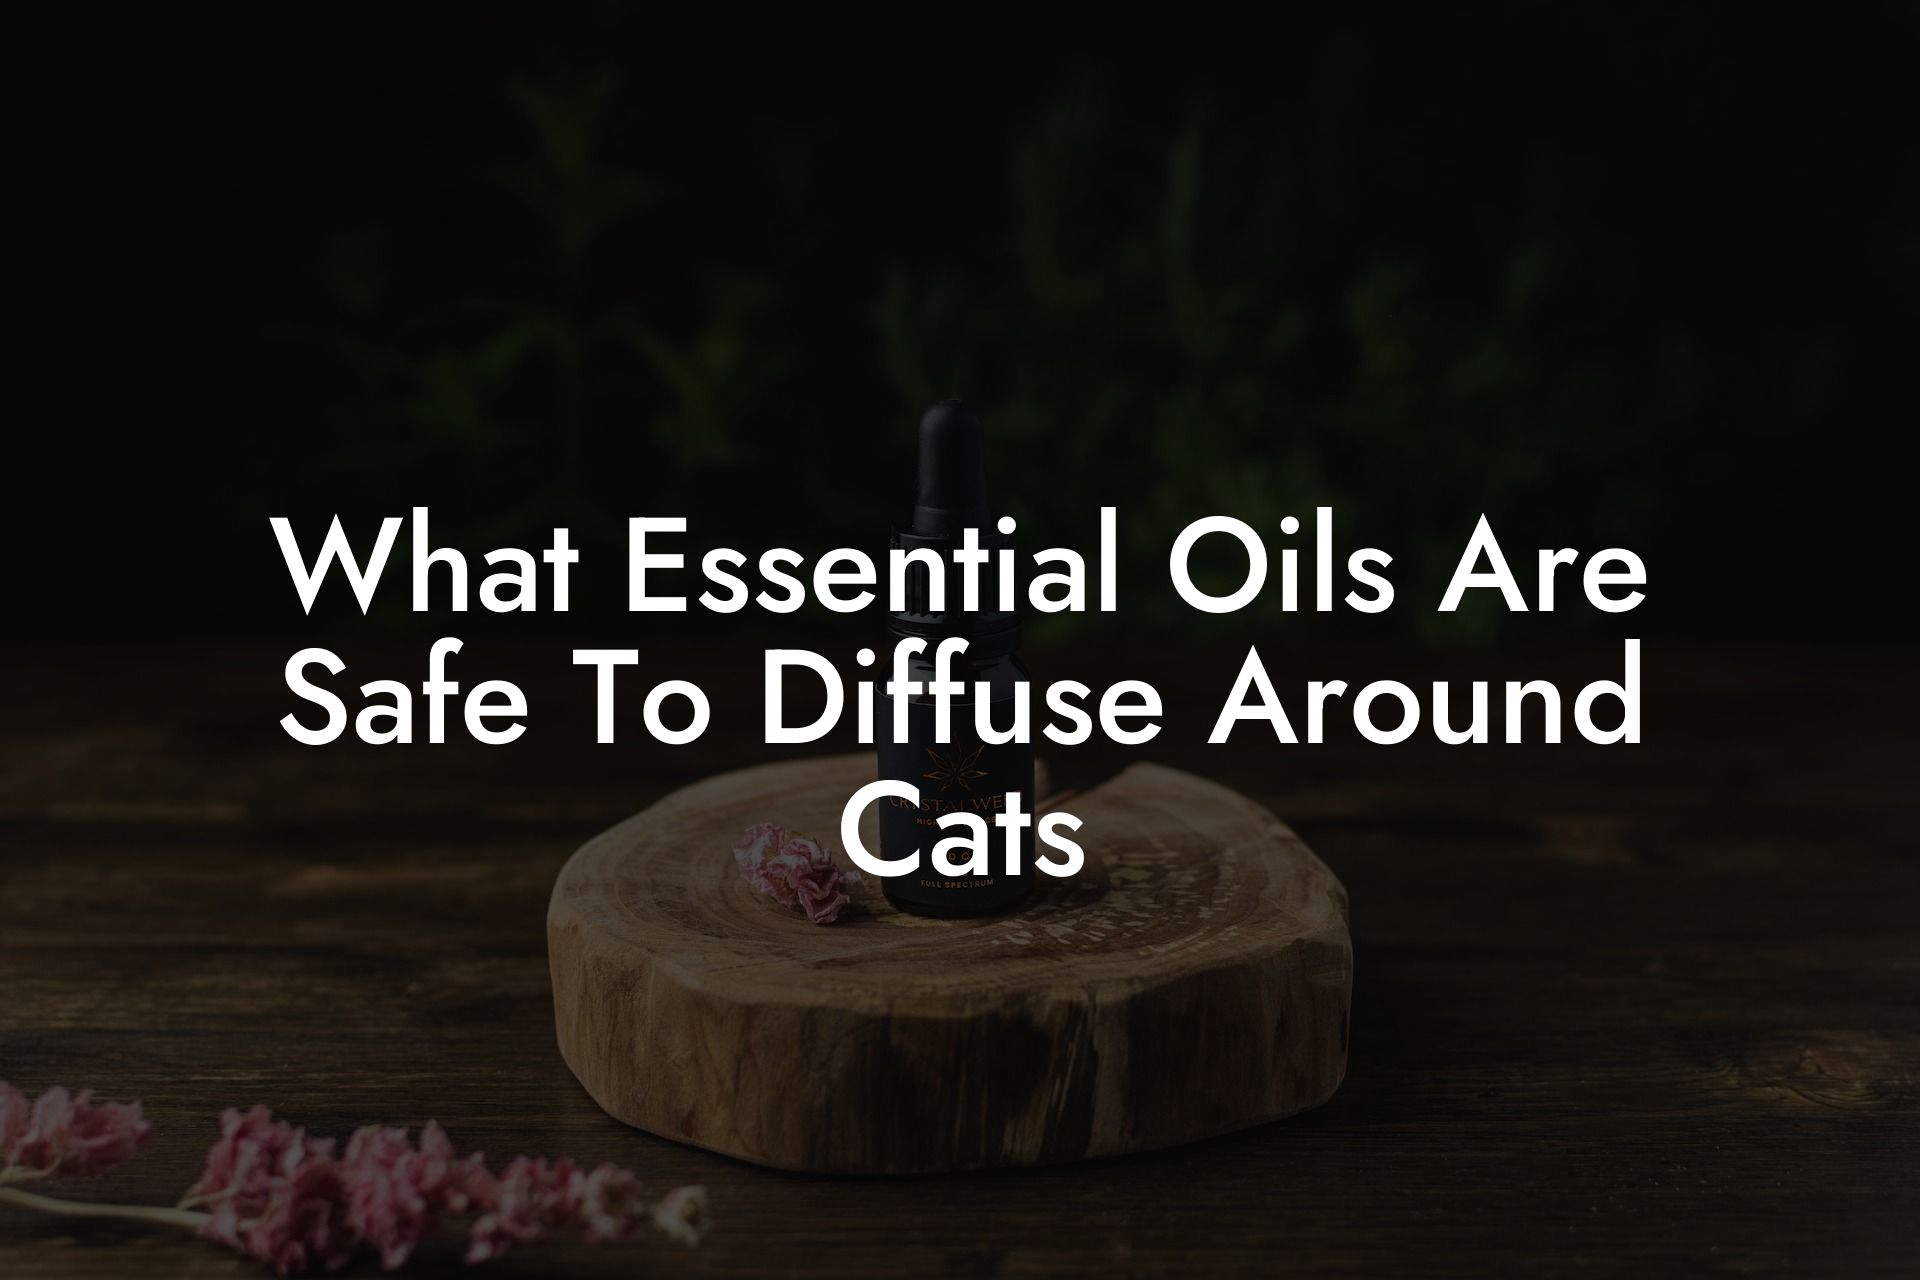 What Essential Oils Are Safe To Diffuse Around Cats